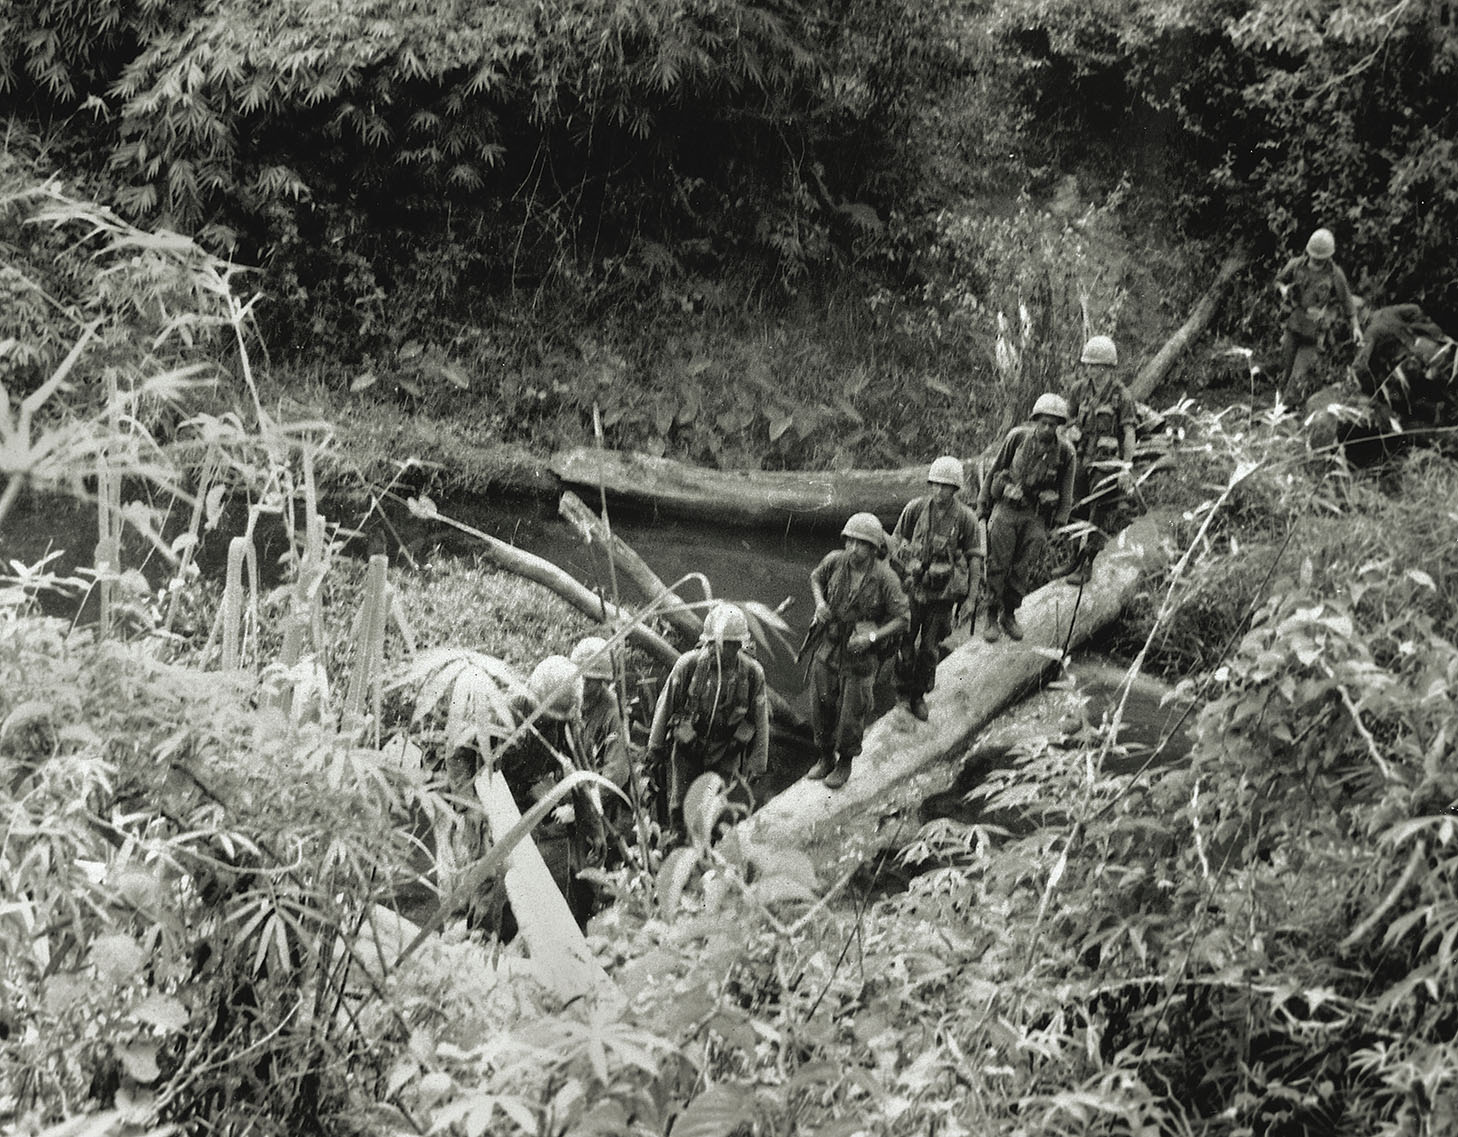 Soldiers in the 4th Infantry Division patrol the jungle in late 1966 during Operation Paul Revere IV, a series of search-and-destroy missions in the region near the Duc Co Special Forces Camp. Charlie Company was doing a sweep of its assigned area in the operation when it was attacked. / Grainger Images